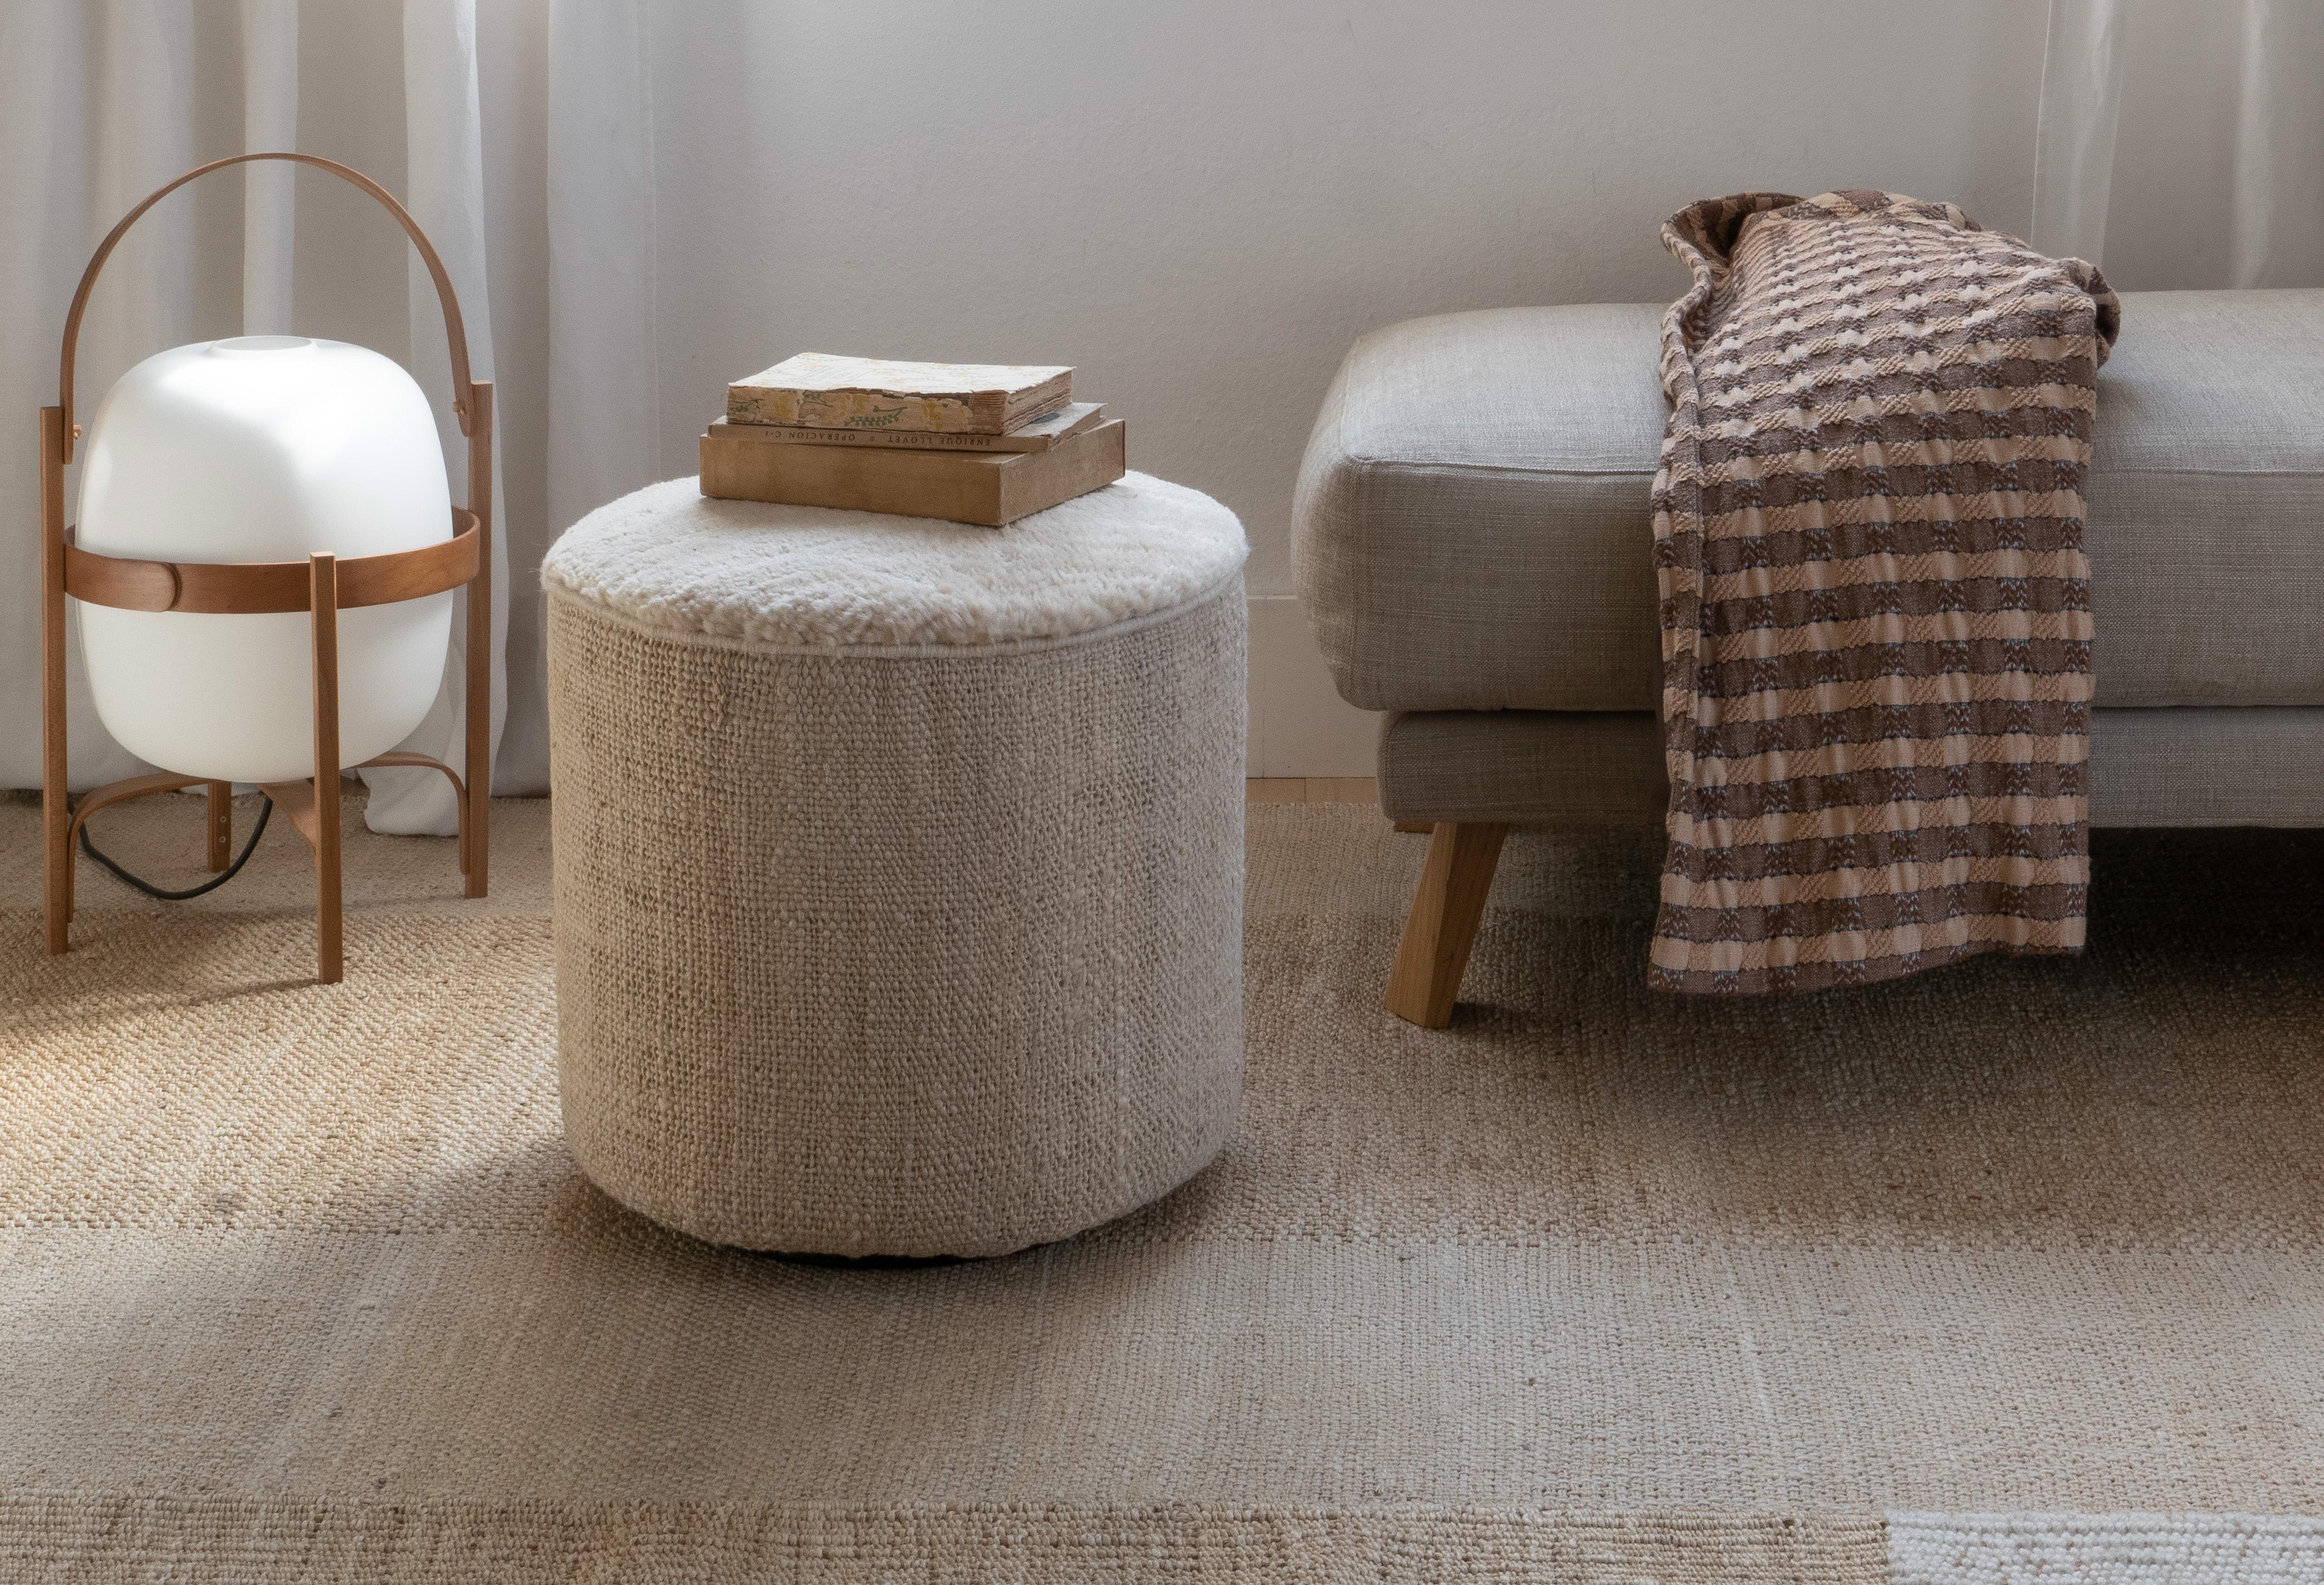 The collections Tres and Persian colors come together to create a very special pouf, a lightweight cylindrical accessory, manageable and adaptable to any space, presented in Vegetal. The combination Tres + Persian Colors impact the senses in a very